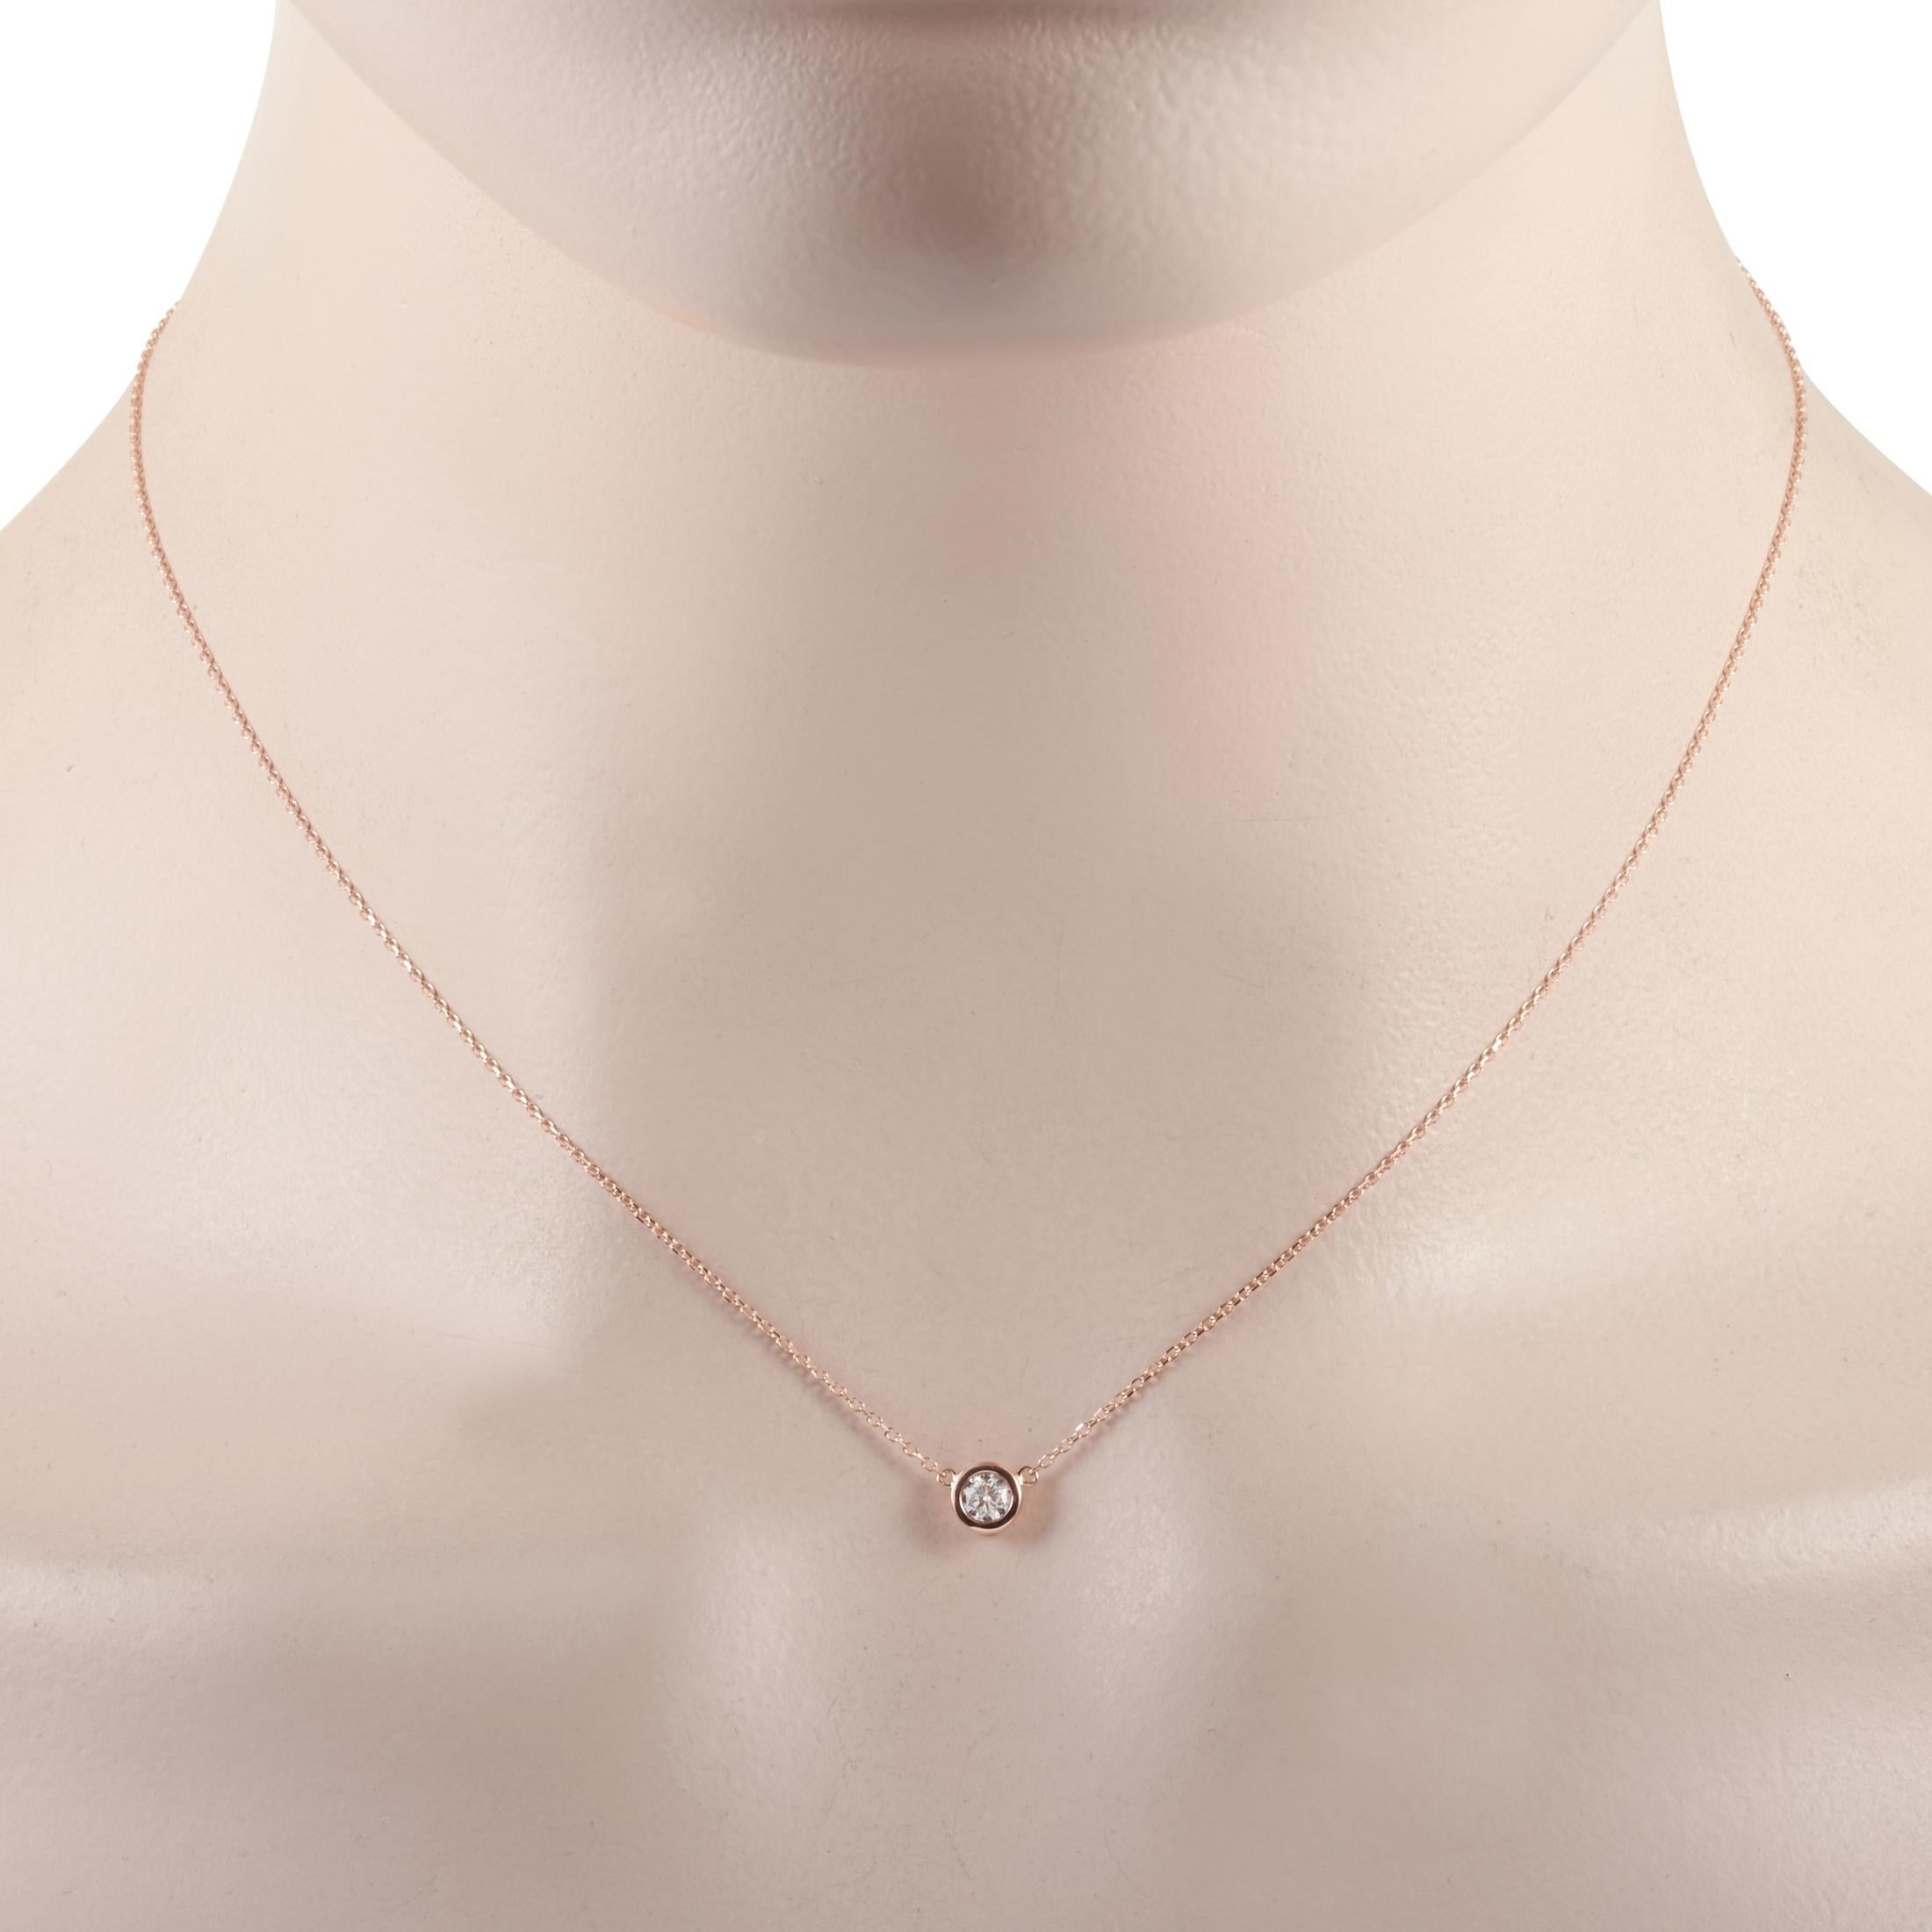 This LB Exclusive necklace is made of 14K rose gold and embellished with a 0.20 ct diamond stone. The necklace weighs 1.4 grams and boasts a 15” chain and a pendant that measures 0.13” in length and 0.13” in width.

Offered in brand new condition,